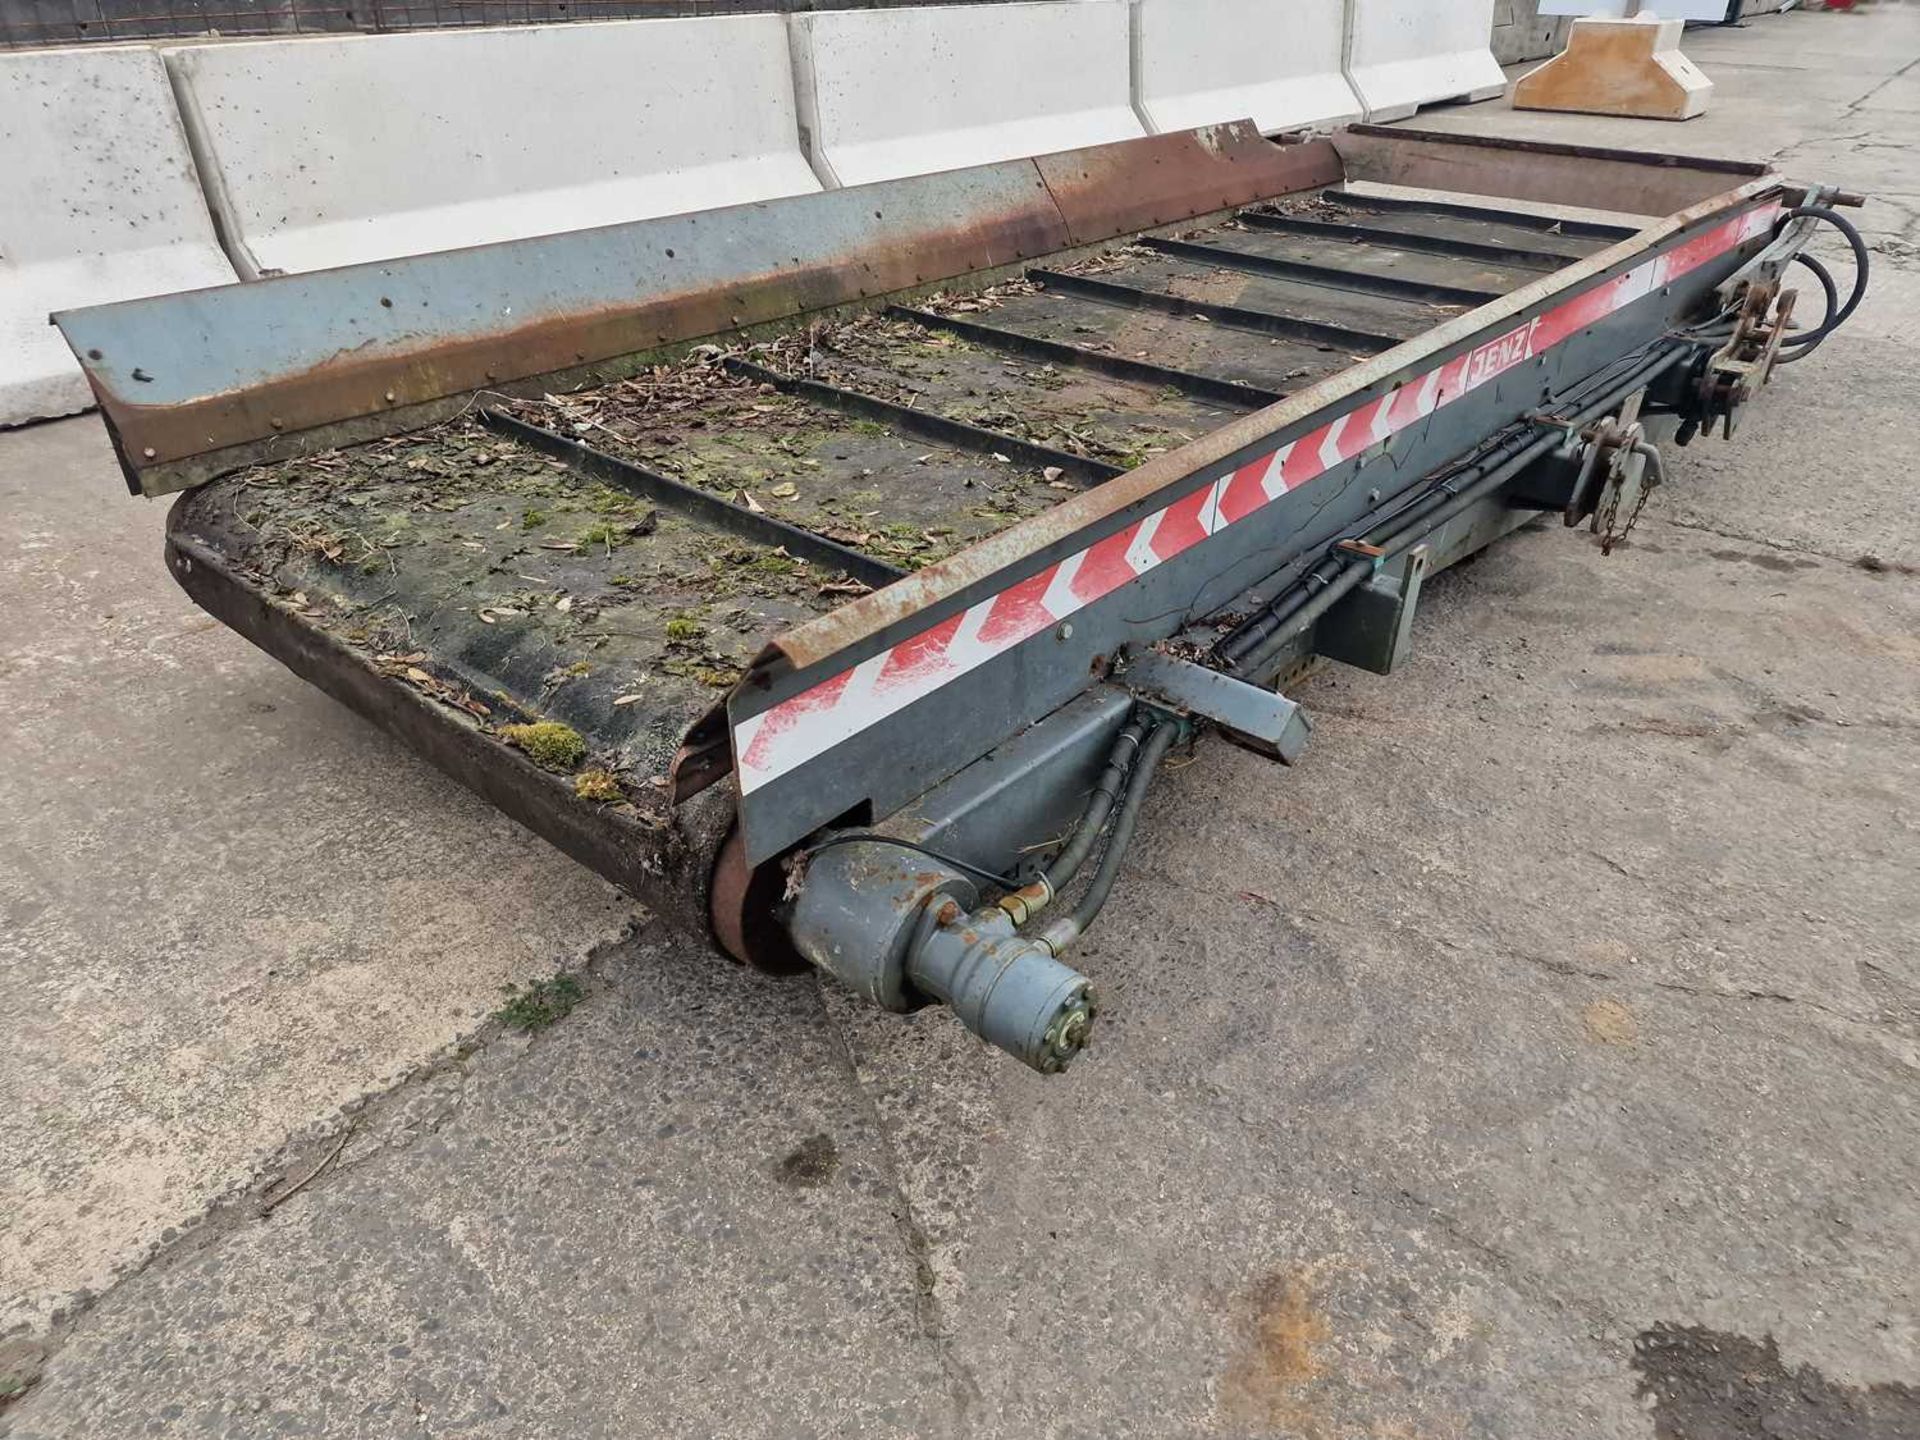 Jenz Rear Discharge Conveyor, 14' Long x 5' Wide, Hydraulic Drive - Image 2 of 7